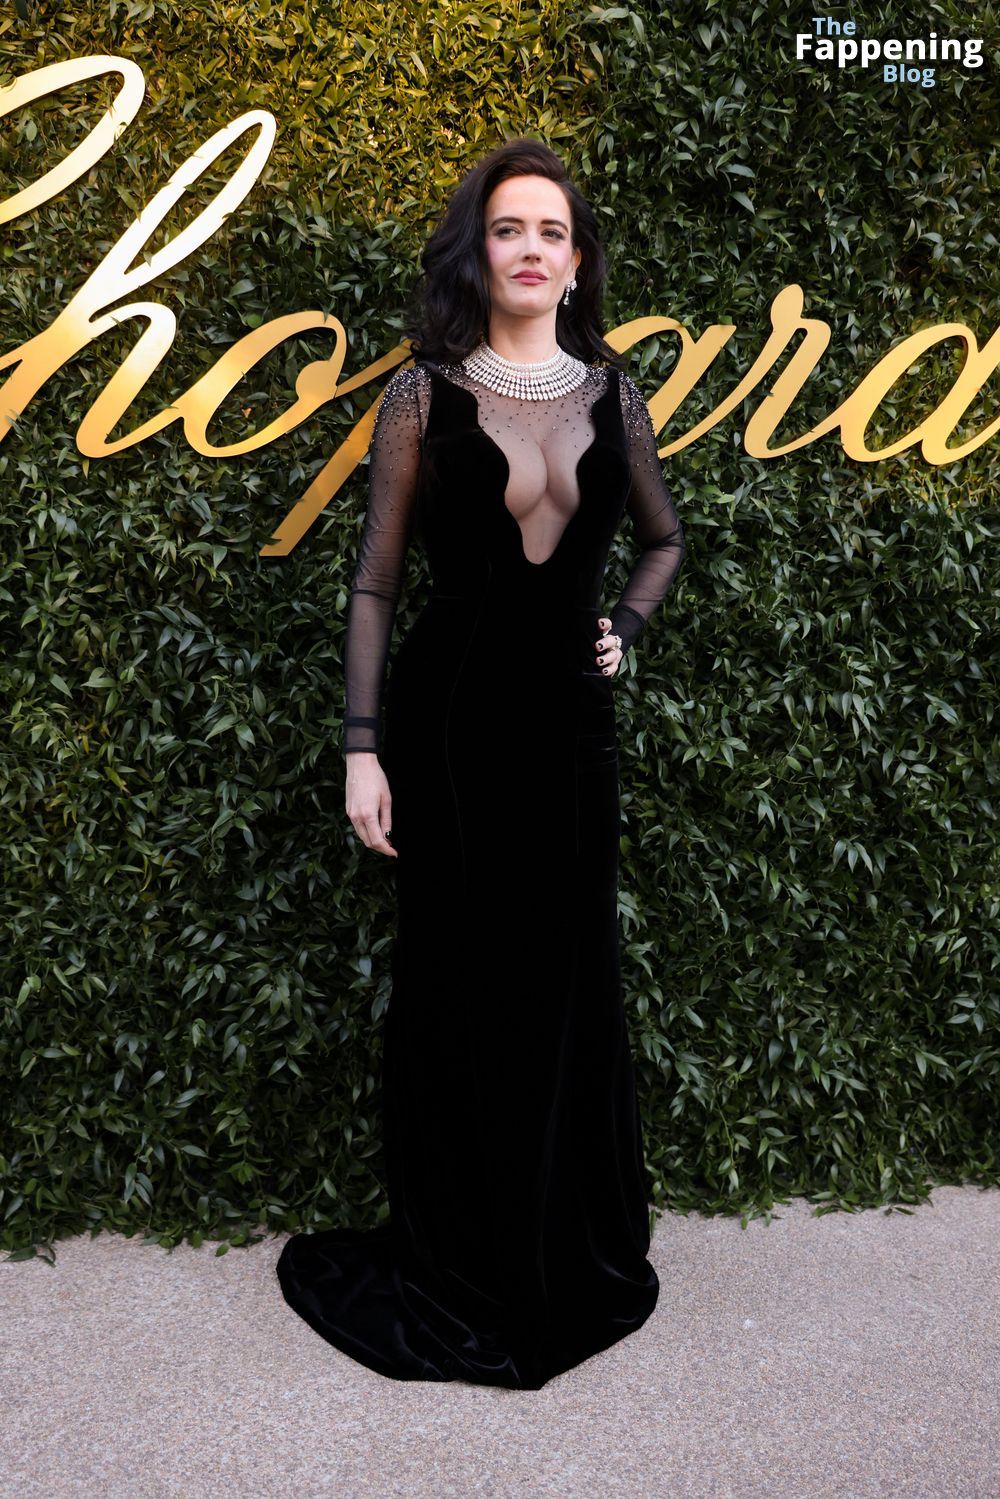 Eva Green Displays Her Sexy Boobs at Chopard’s Once Upon a Time Event (35 Photos + Video)